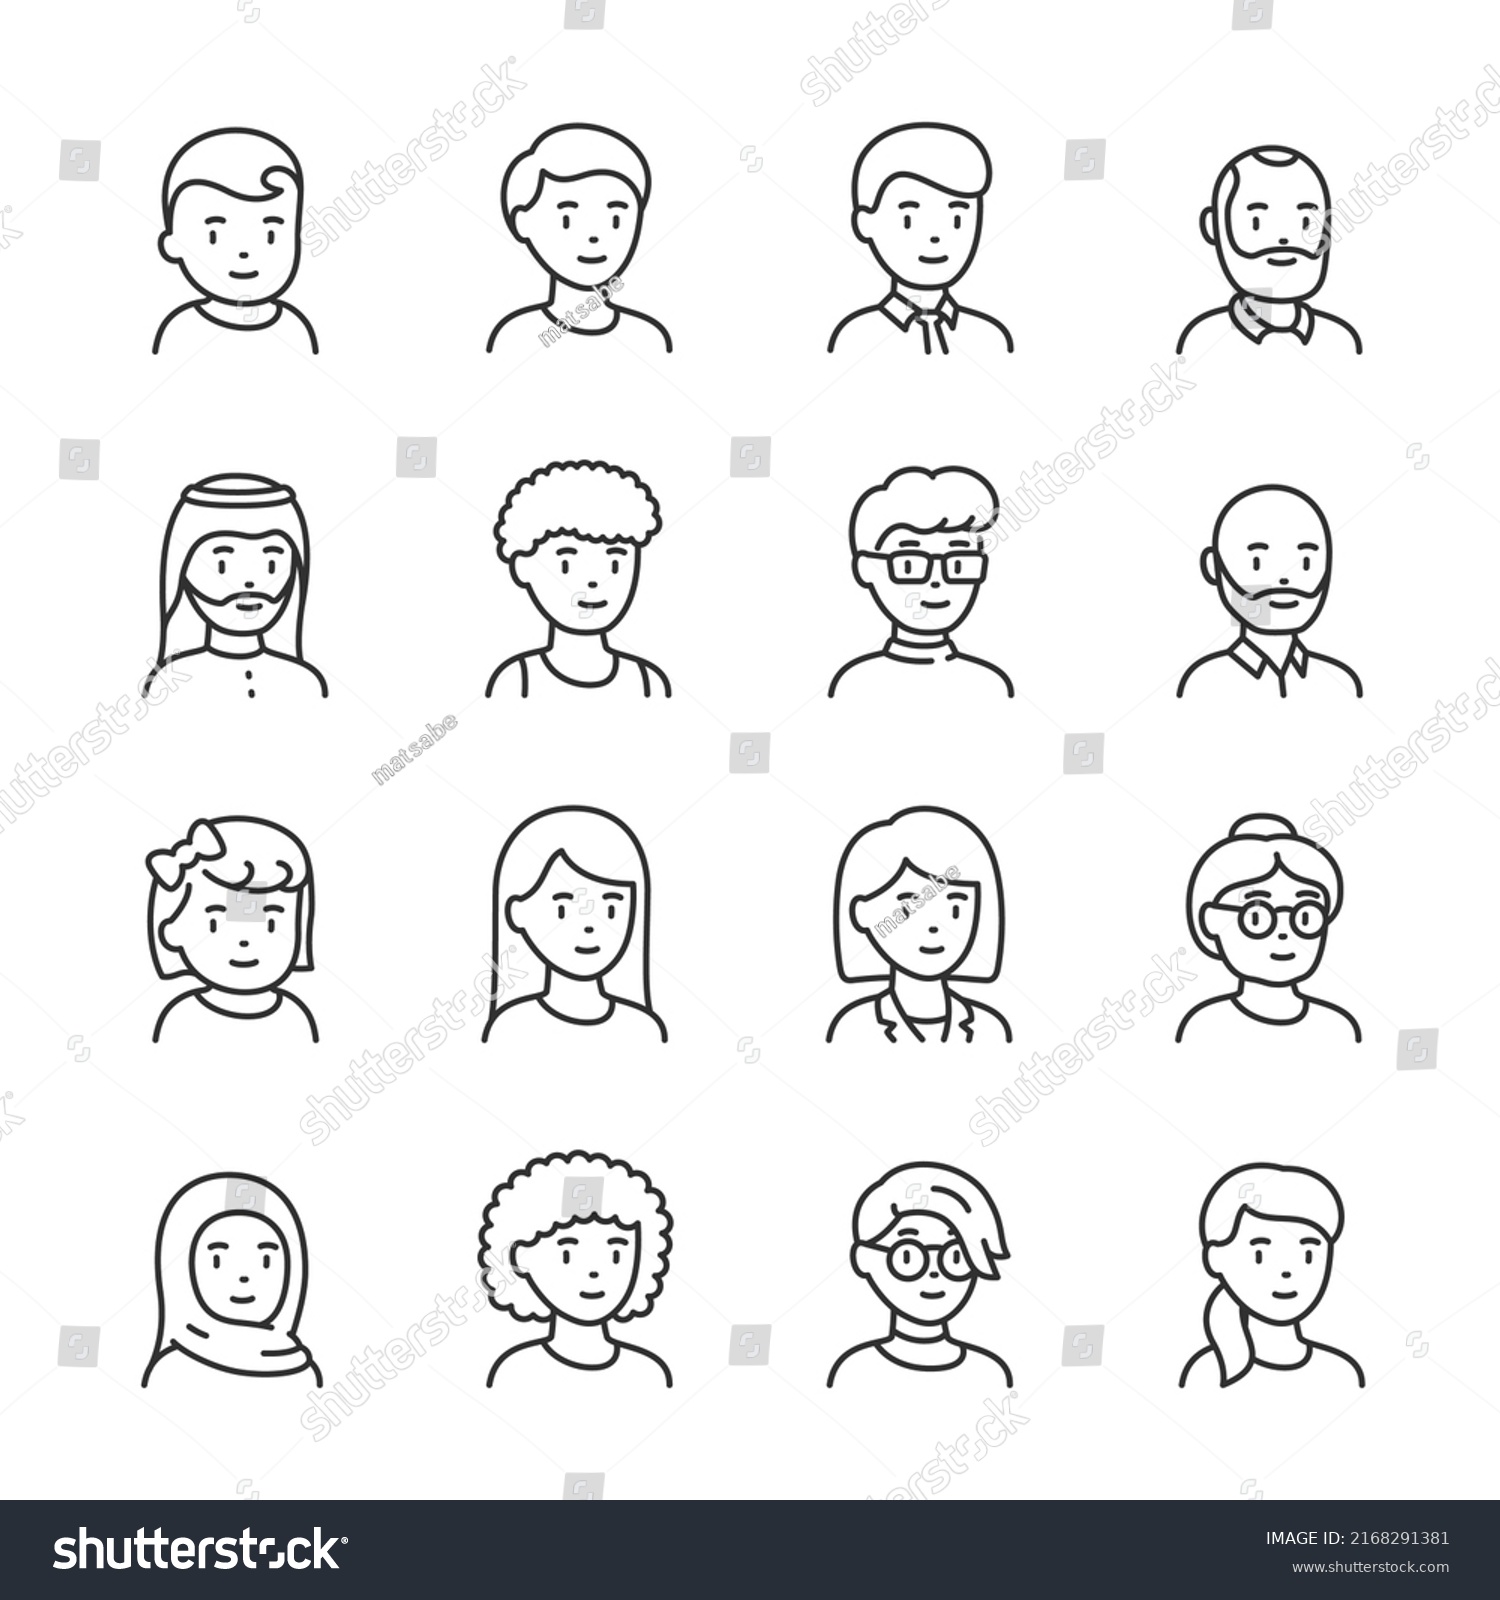 SVG of People icons set. Avatar men and women of different ages, young and old, linear icon collection. Portrait of a character with a face. Different gender and hairstyle. Line with editable stroke svg